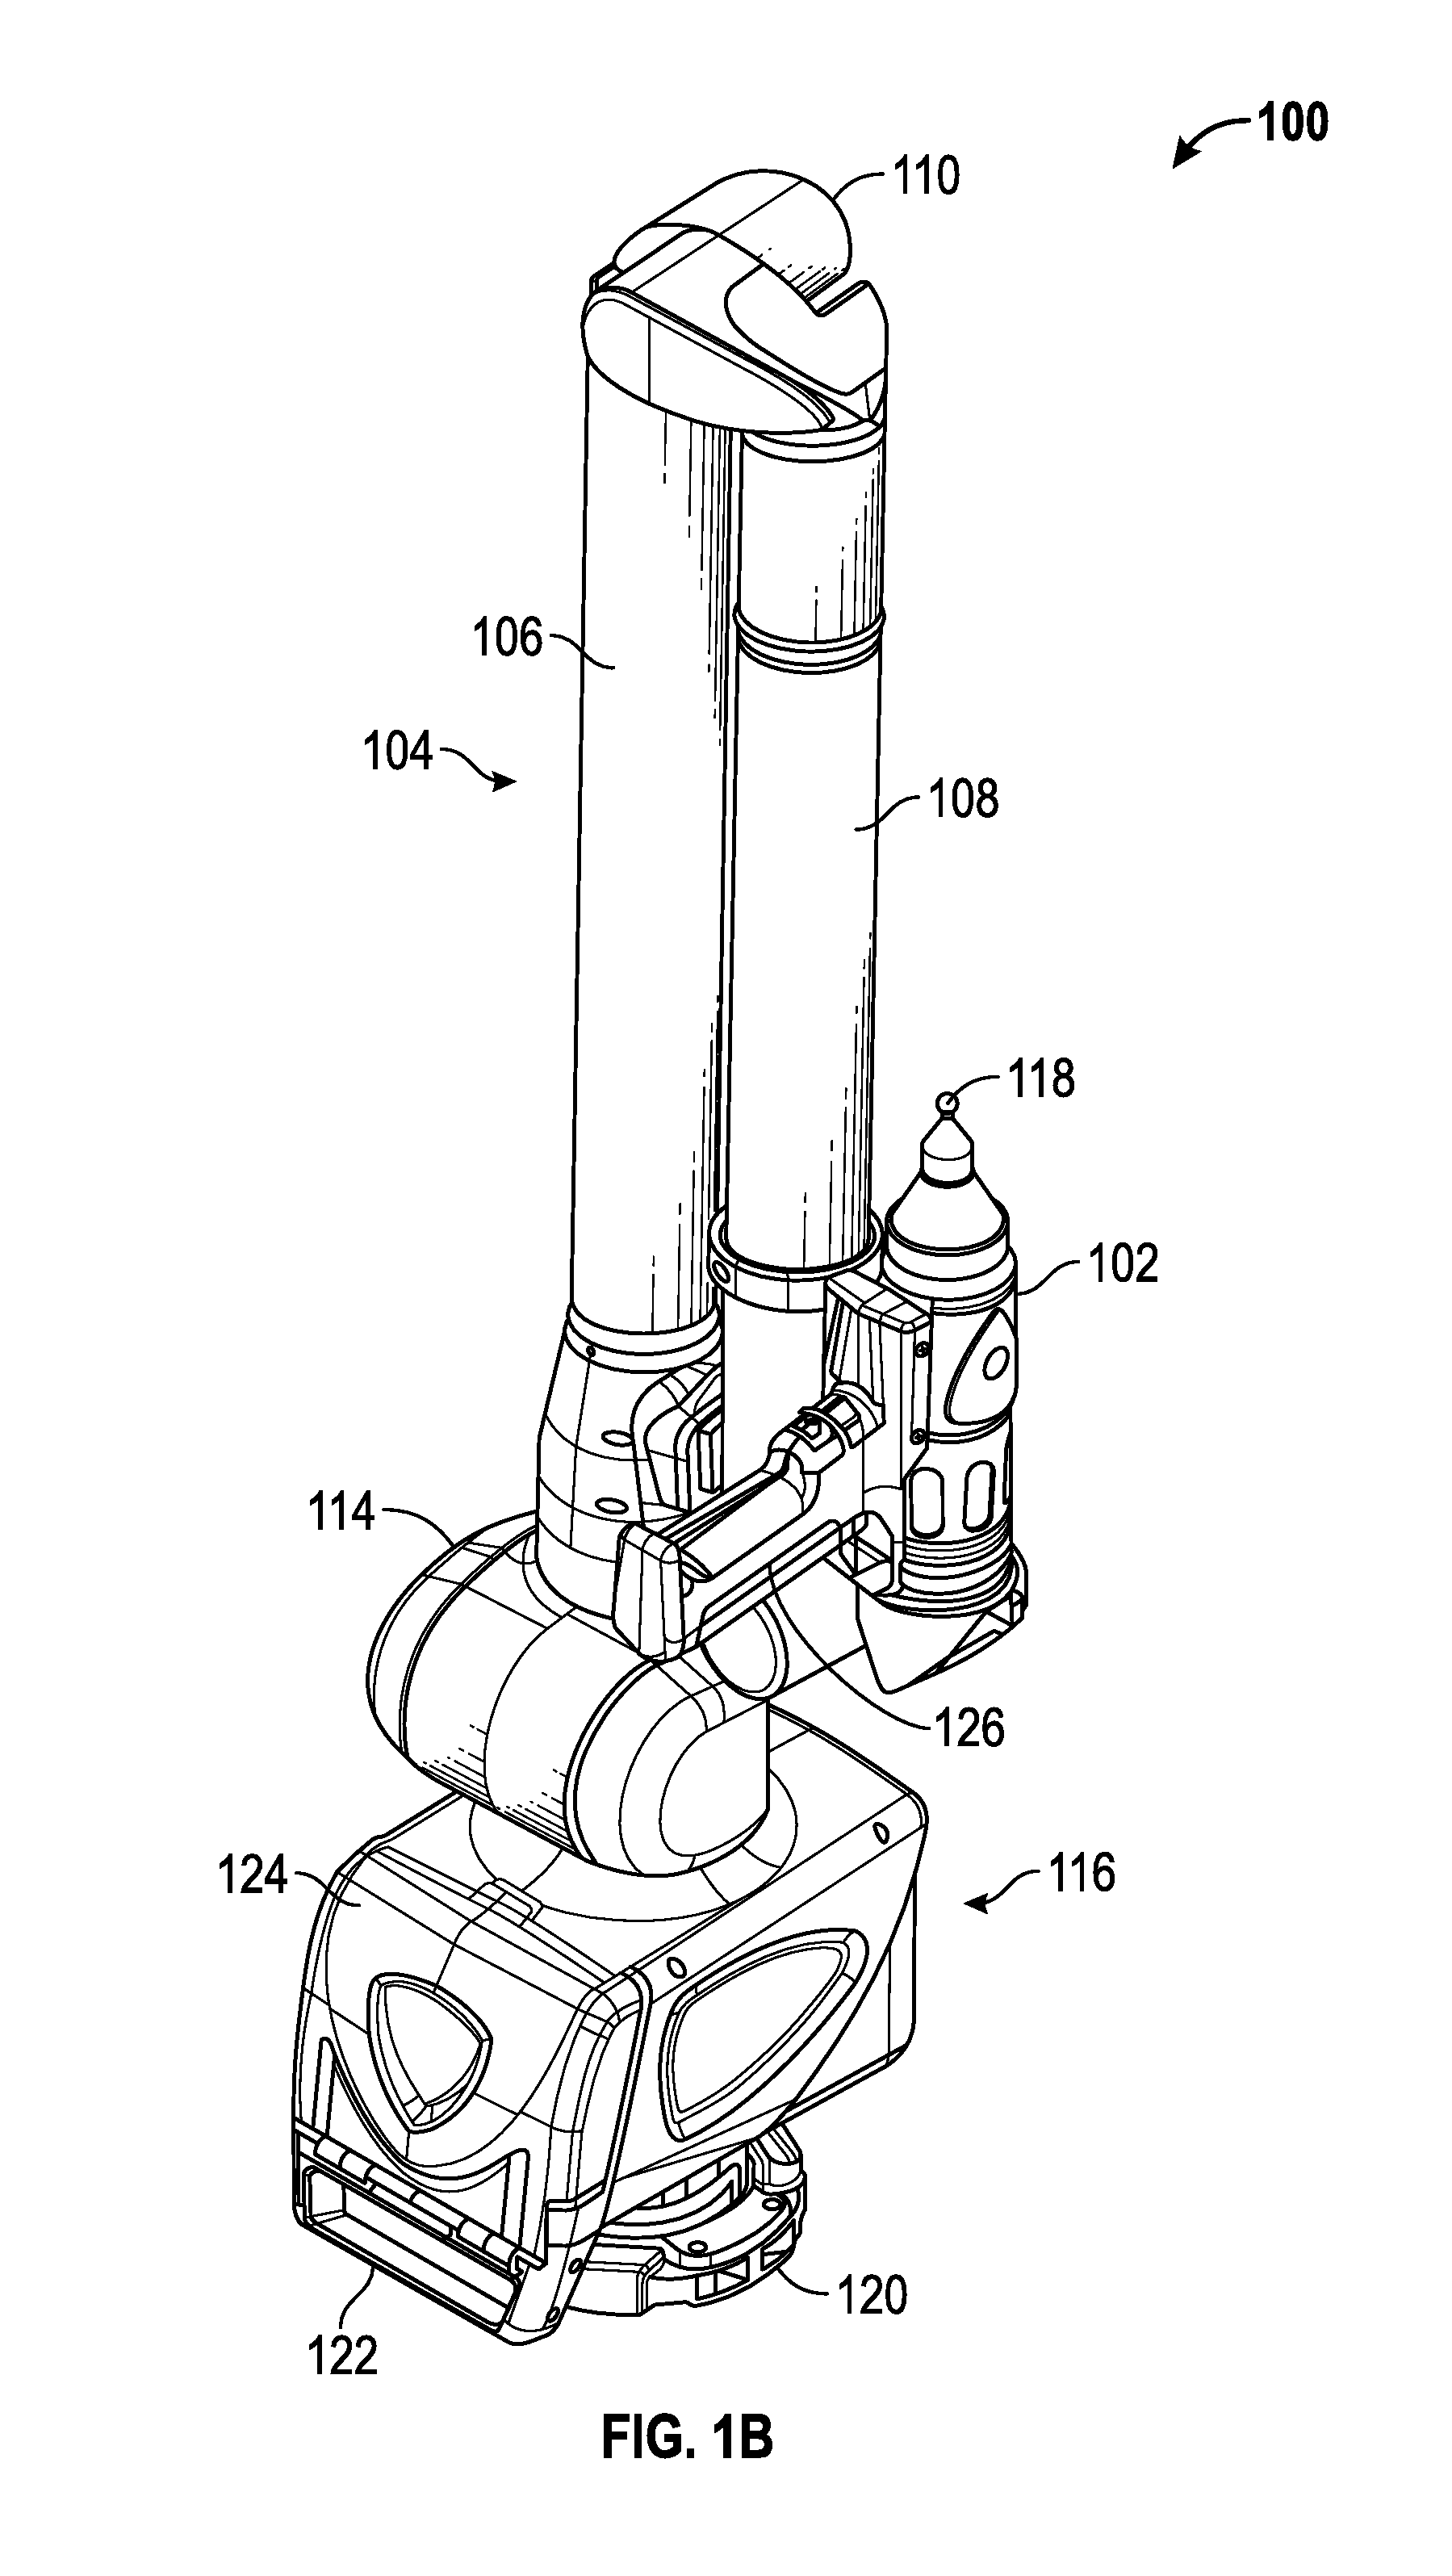 Articulated arm coordinate measurement machine having a 2d camera and method of obtaining 3D representations